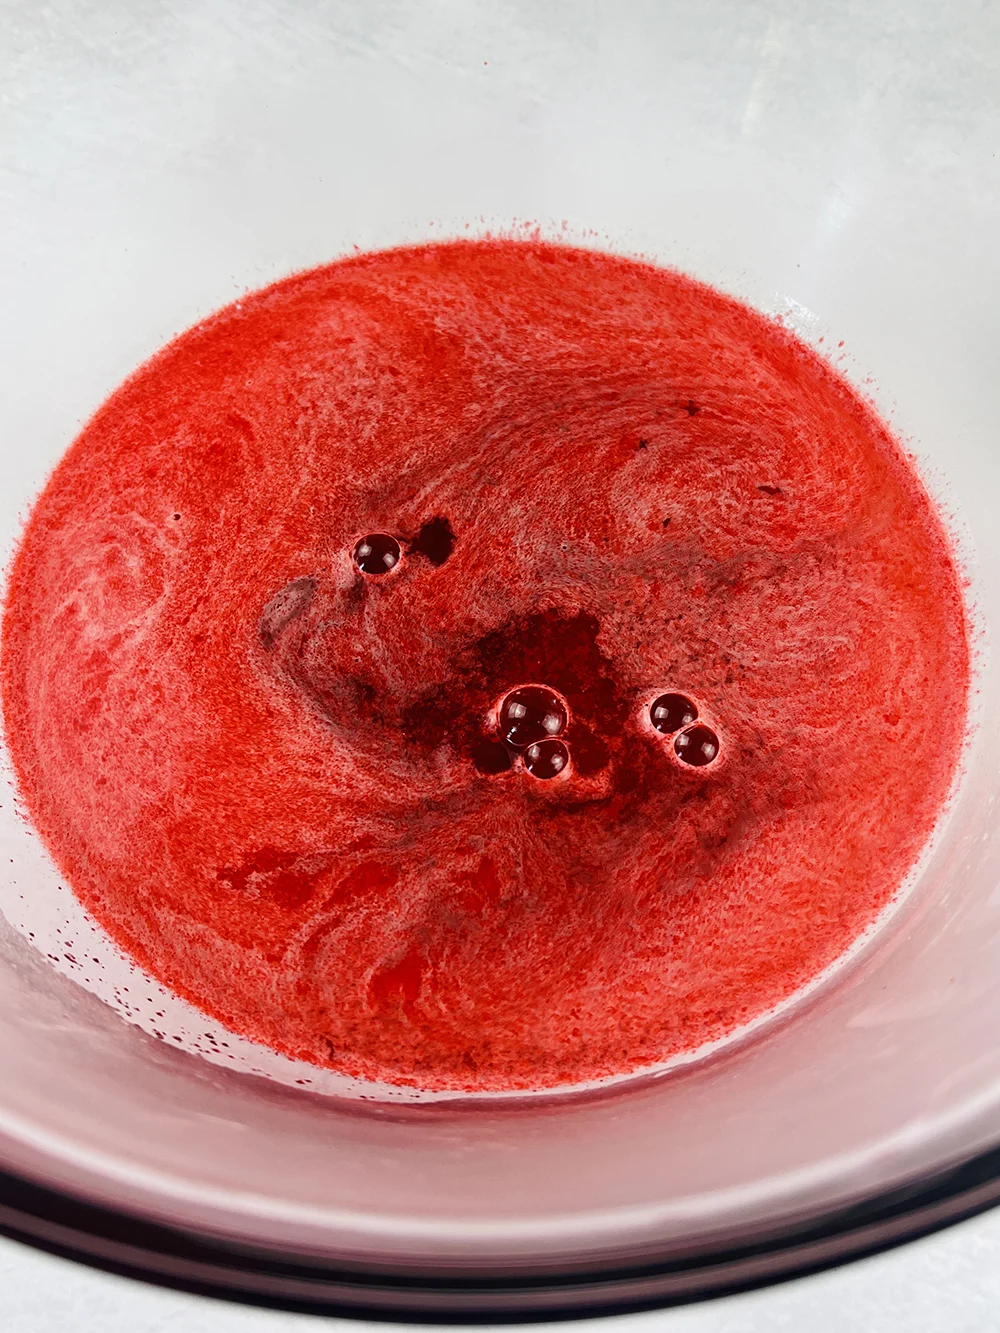 red mixture in a bowl